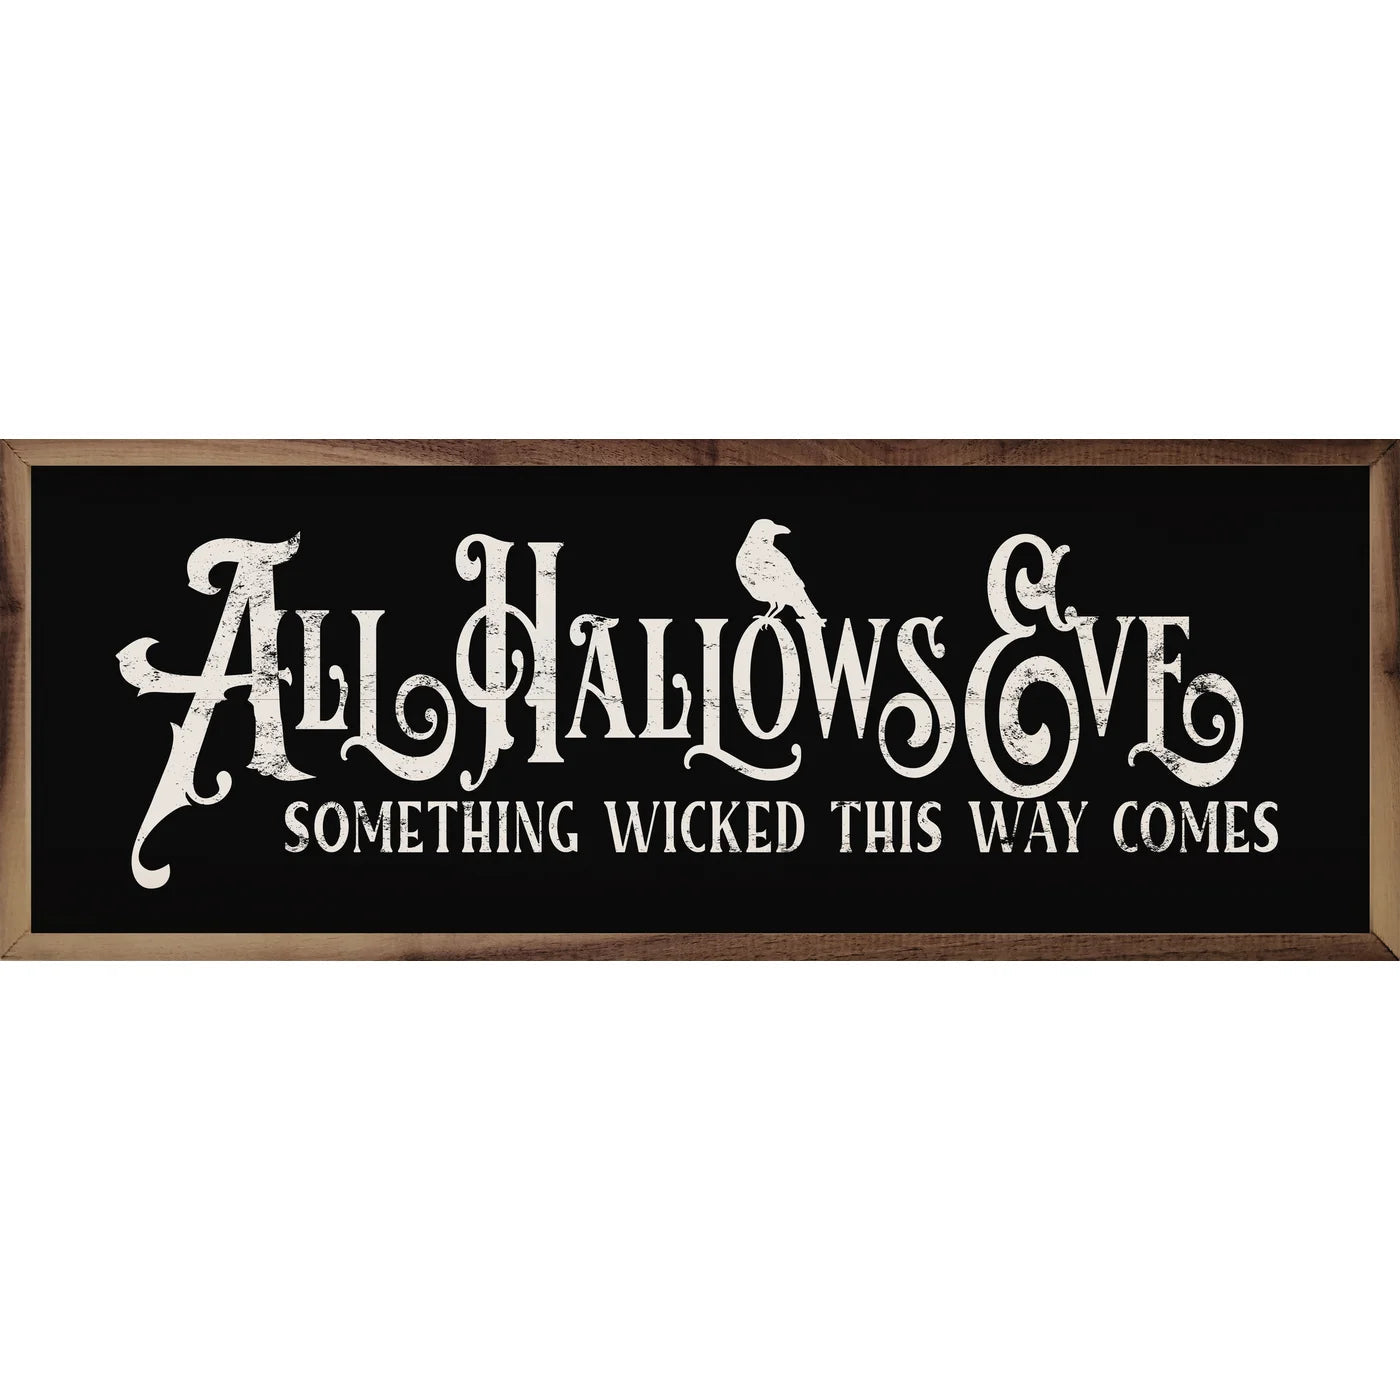 All Hallows Eve Something Wicked Wood Framed Print